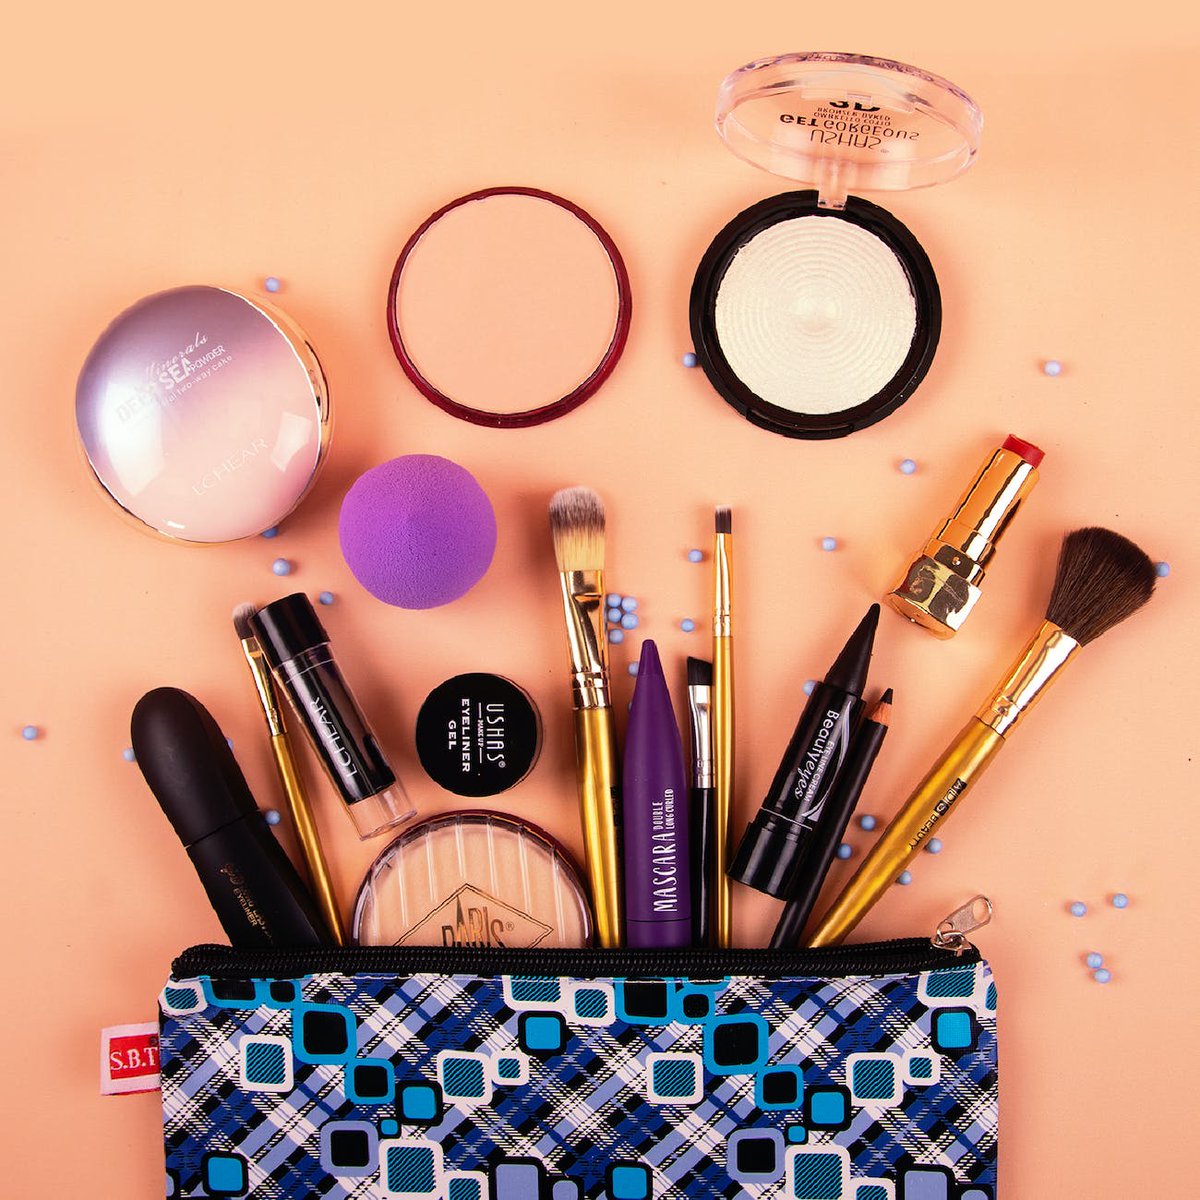 POLL OF THE WEEK / POTW

What’s your favorite make-up item? 
A) Concealer 
B) Lipstick/gloss 
C) Mascara 
D) Eyeliner 

#polloftheweek #potw #questions #fillintheblanks #truefalse #favorites #rememberwhen #answers #thoughts #opinions